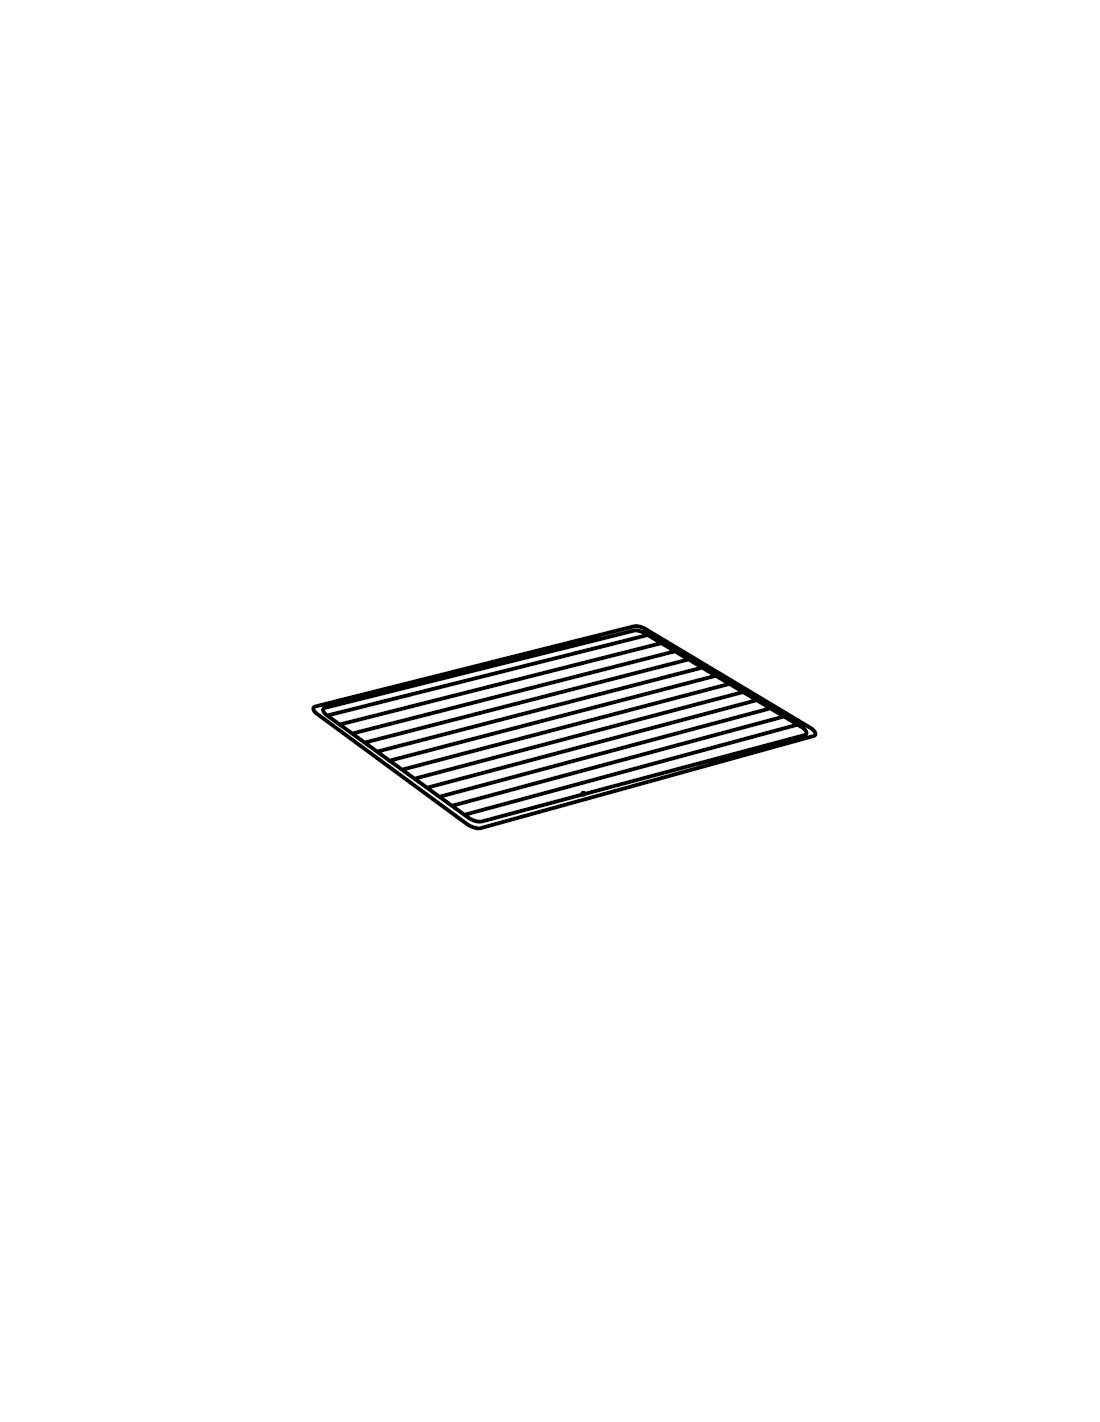 Stainless steel grate 32.4x 35.4 cm